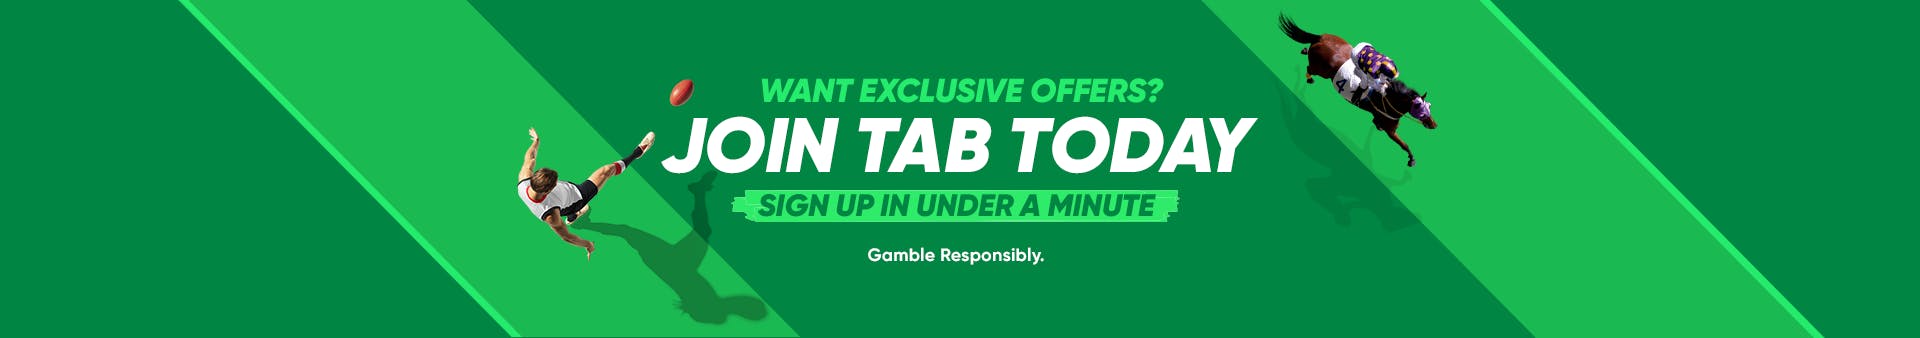 Tab online betting qld newspapers best betting apps in michigan